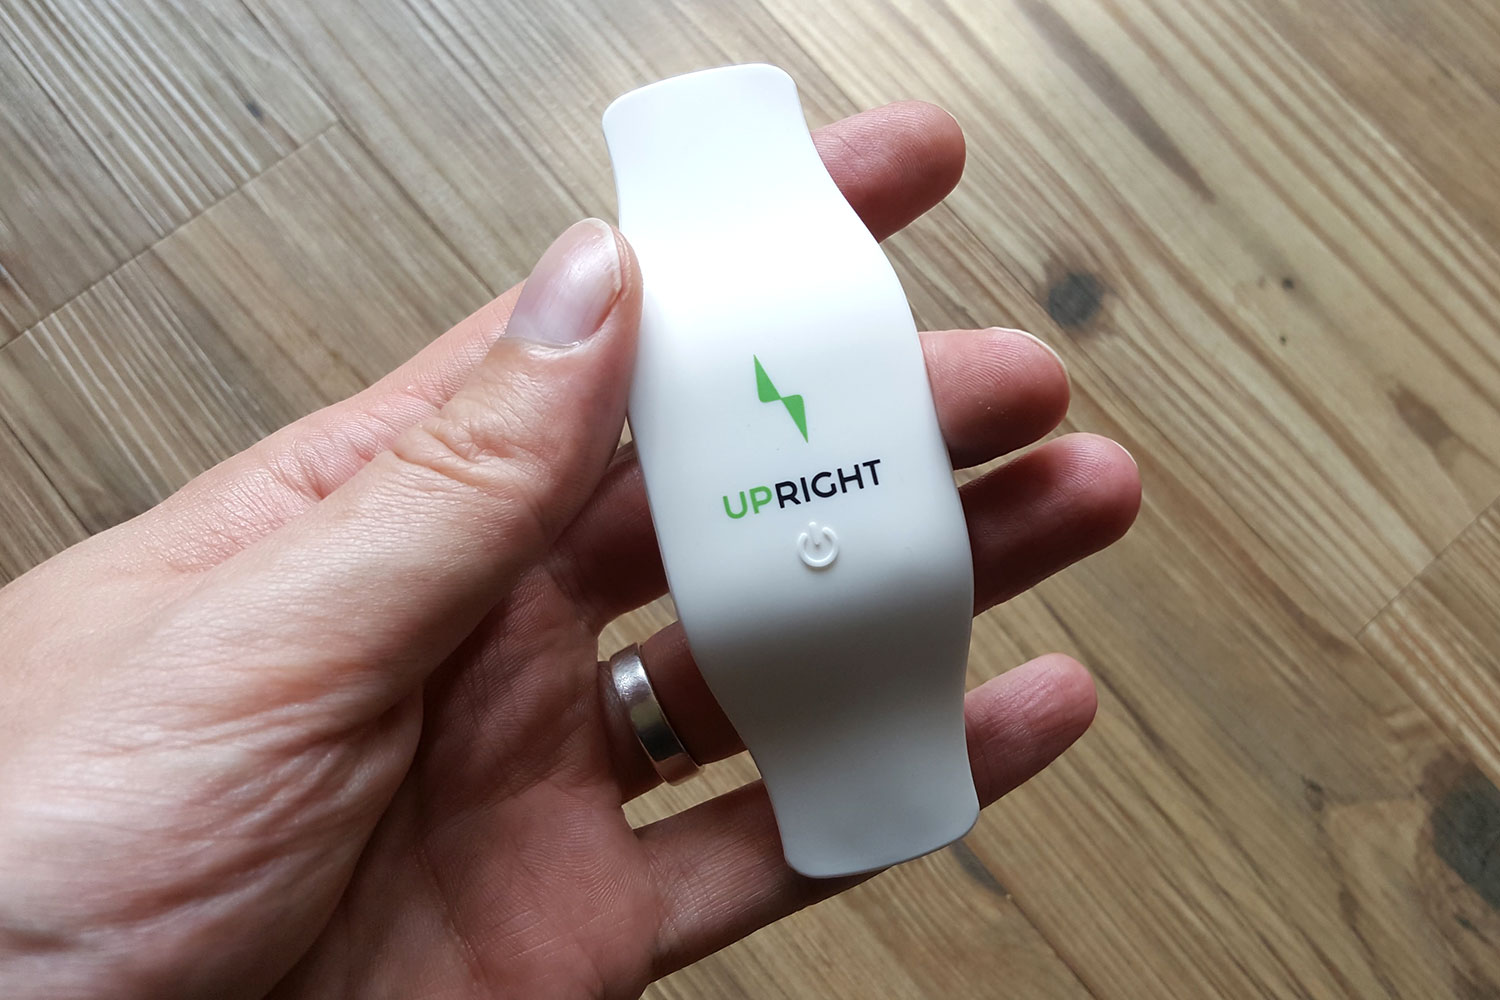 Upright posture training wearable review